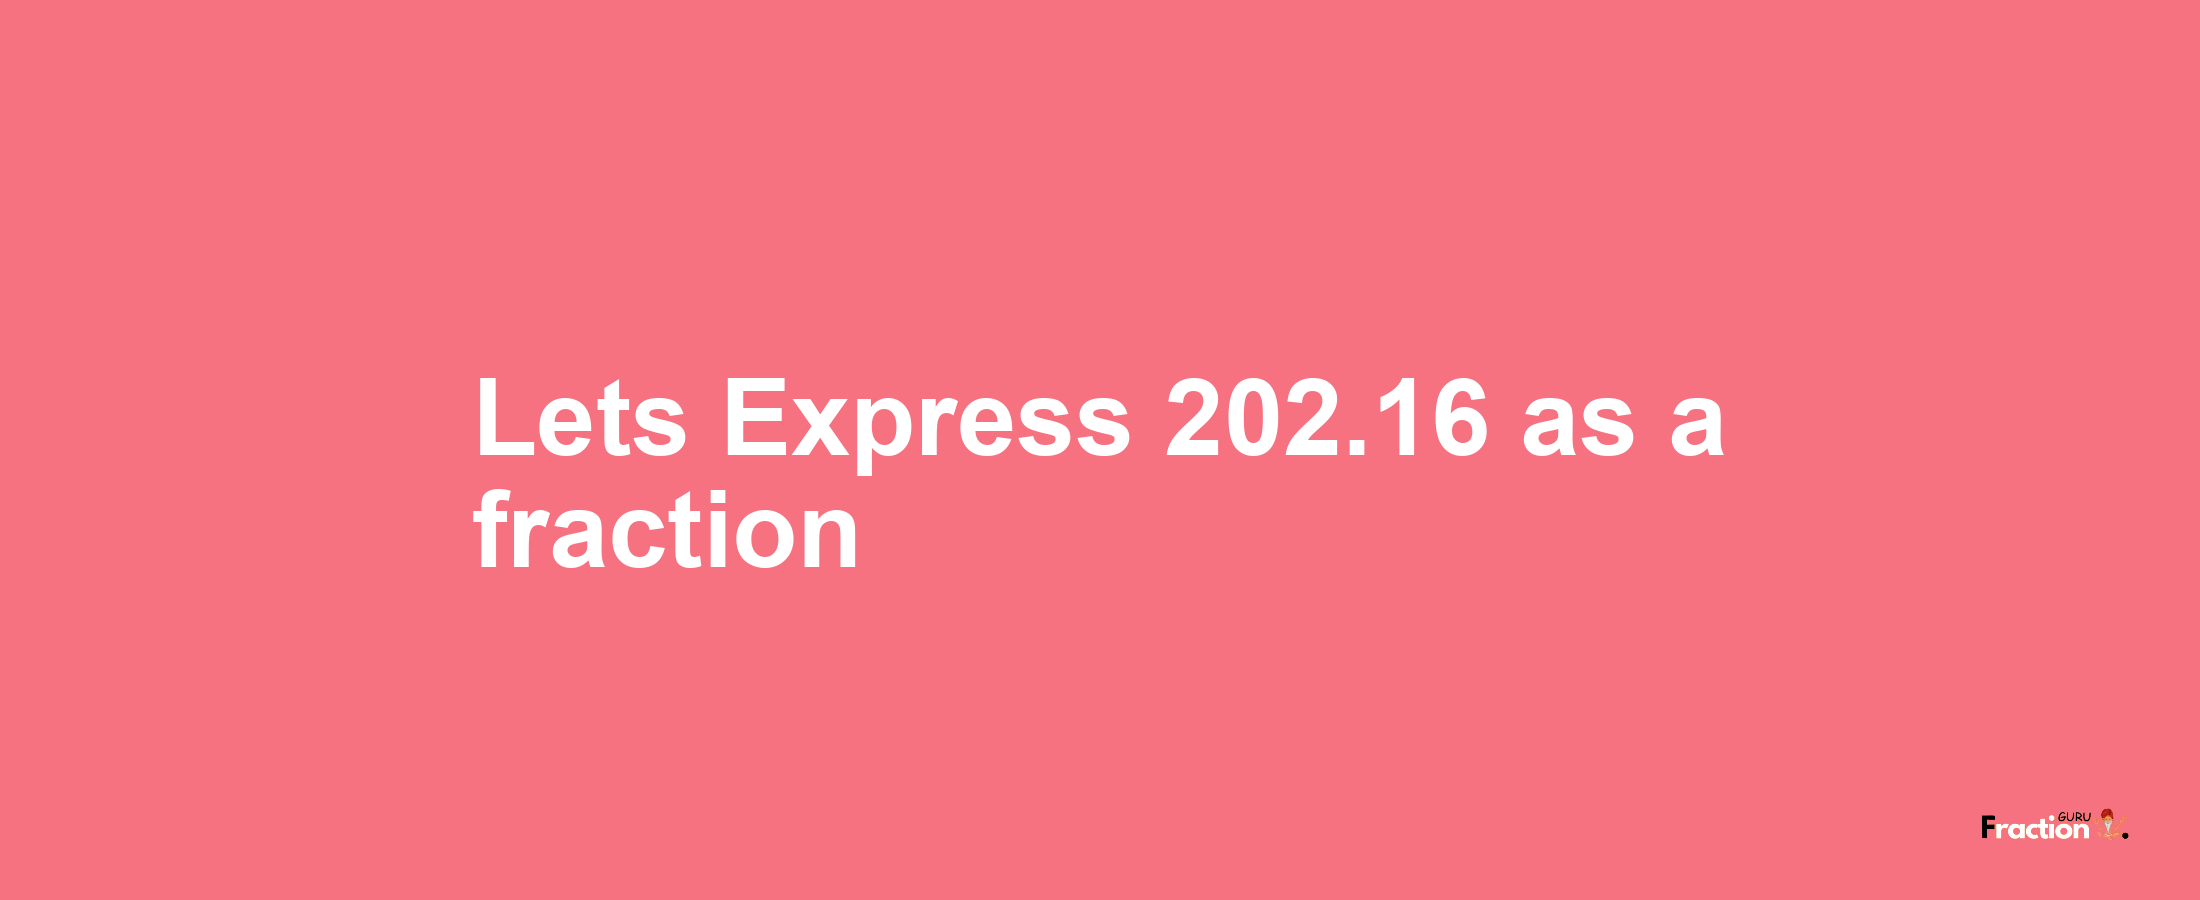 Lets Express 202.16 as afraction